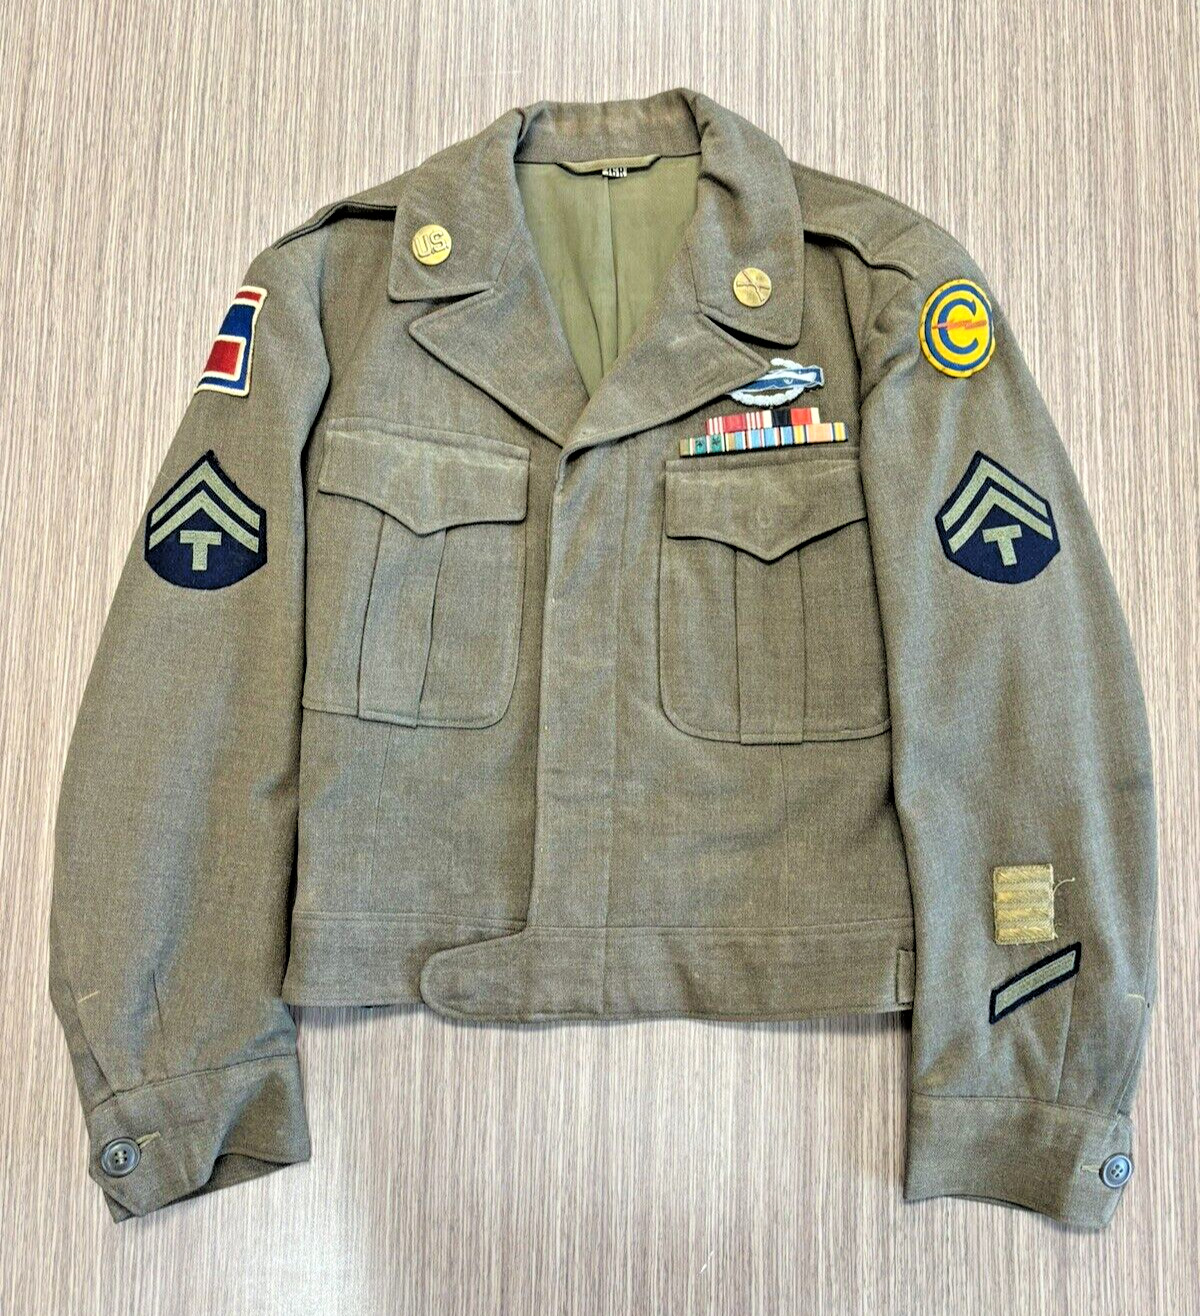 WW2 US 7TH ARMY 69TH INFANTRY DIVISION ENLISTED MEN IKE DRESS JACKET COAT   CIB